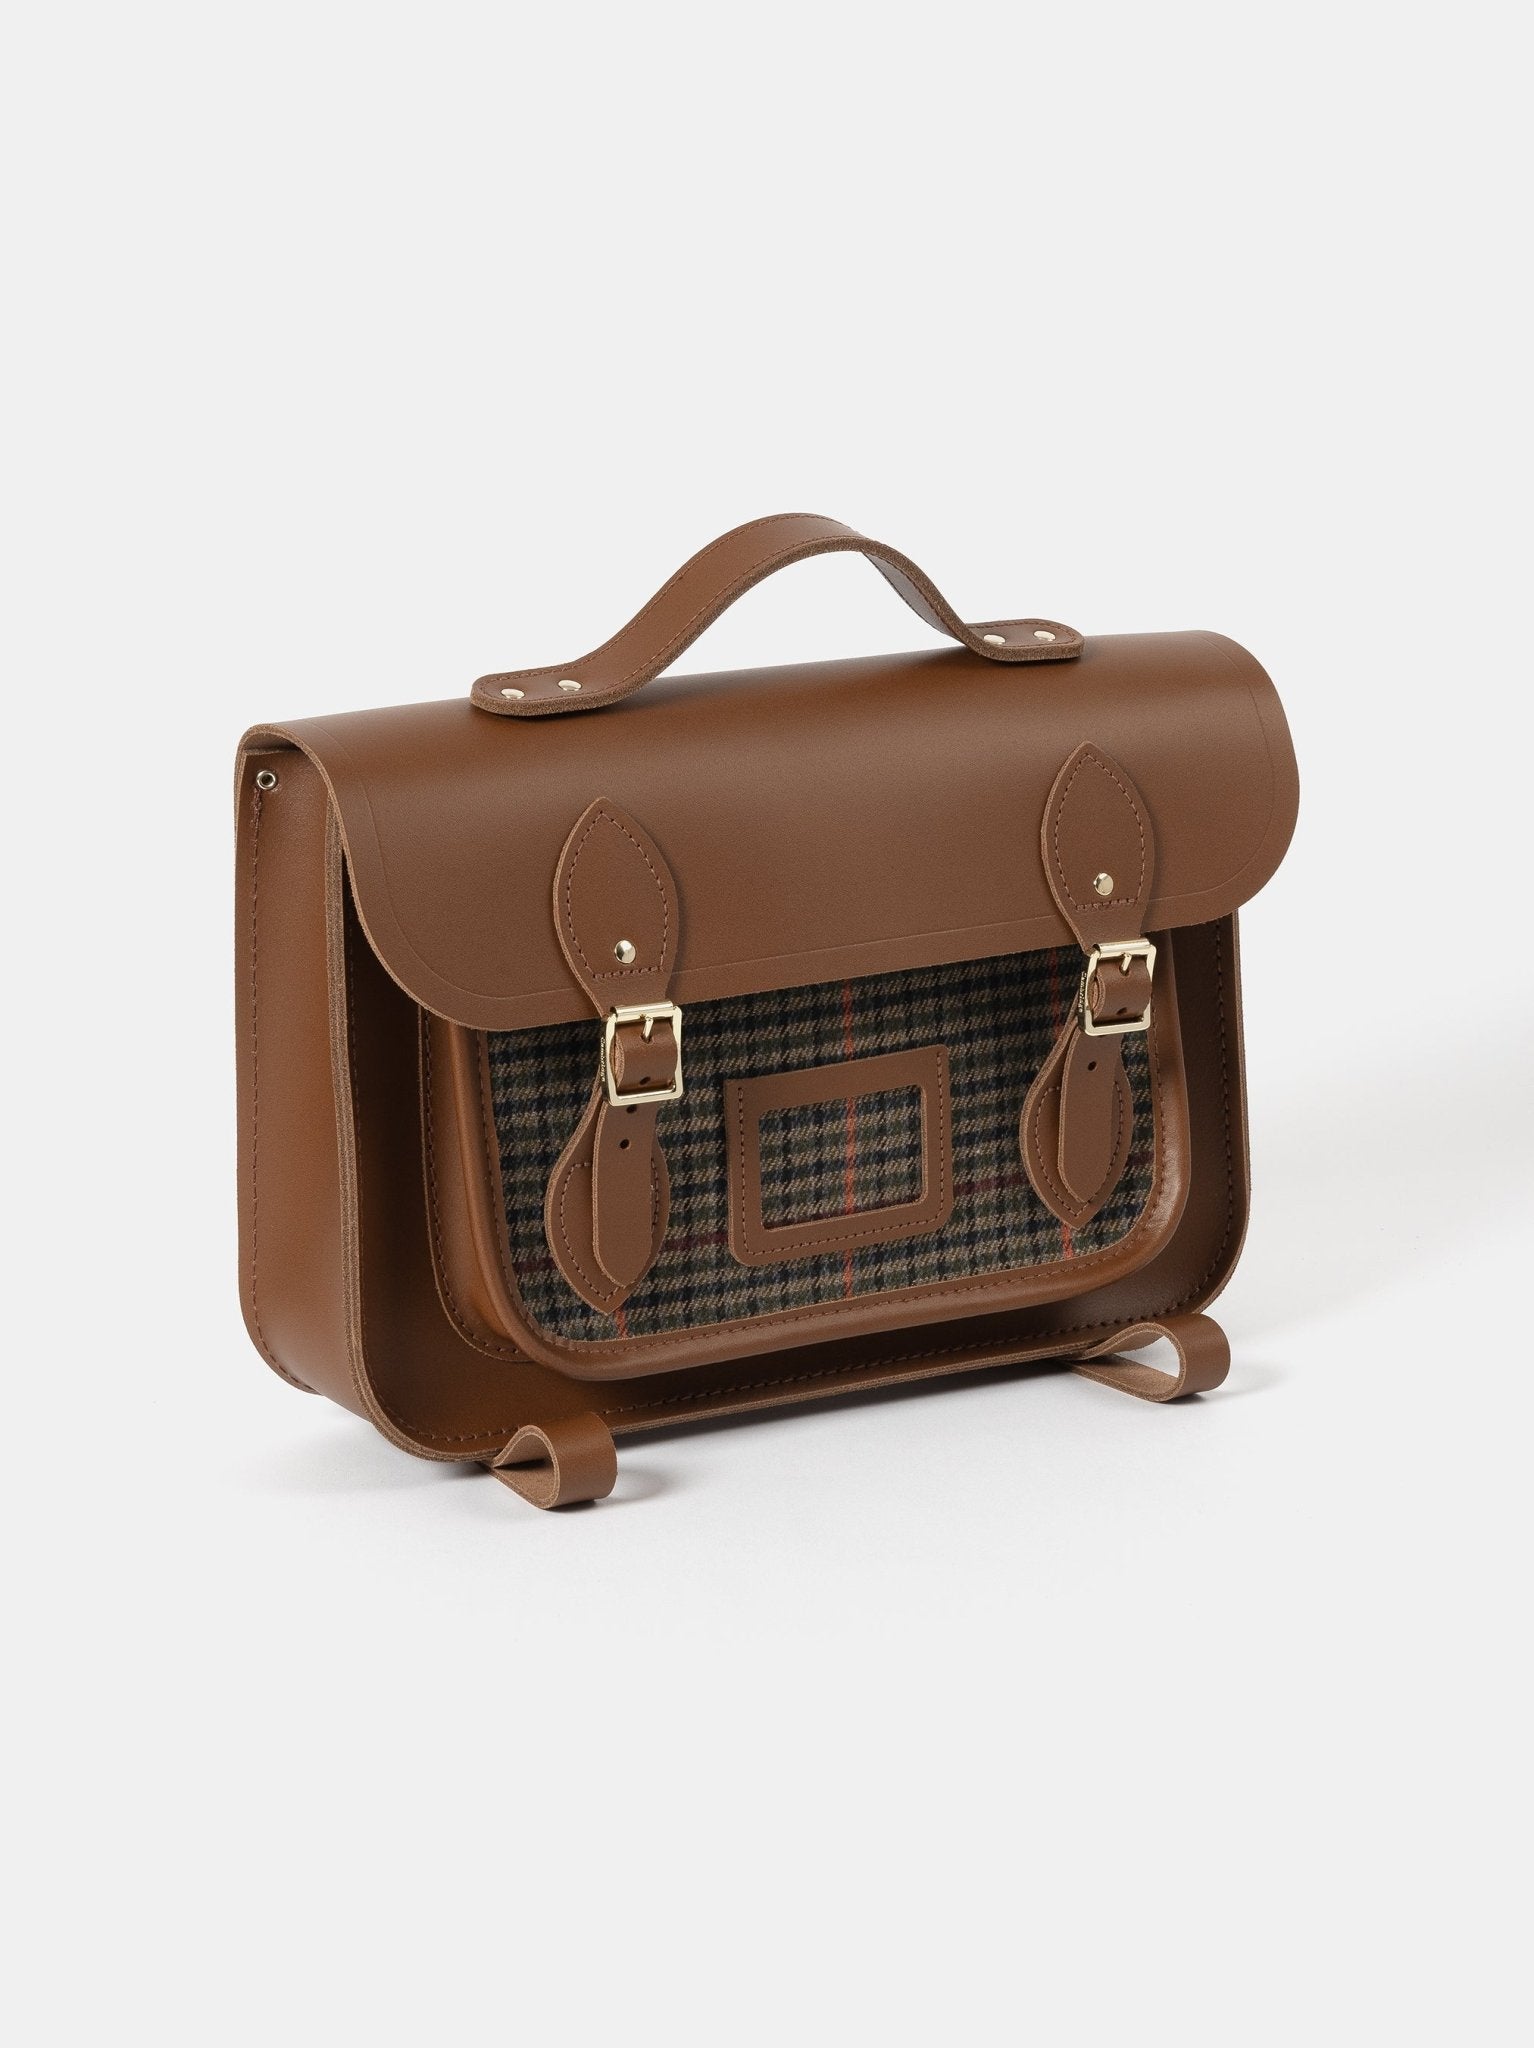 The 13 Inch Batchel Backpack - Vintage with Pepa London Brown Tweed - The Cambridge Satchel Company EU Store